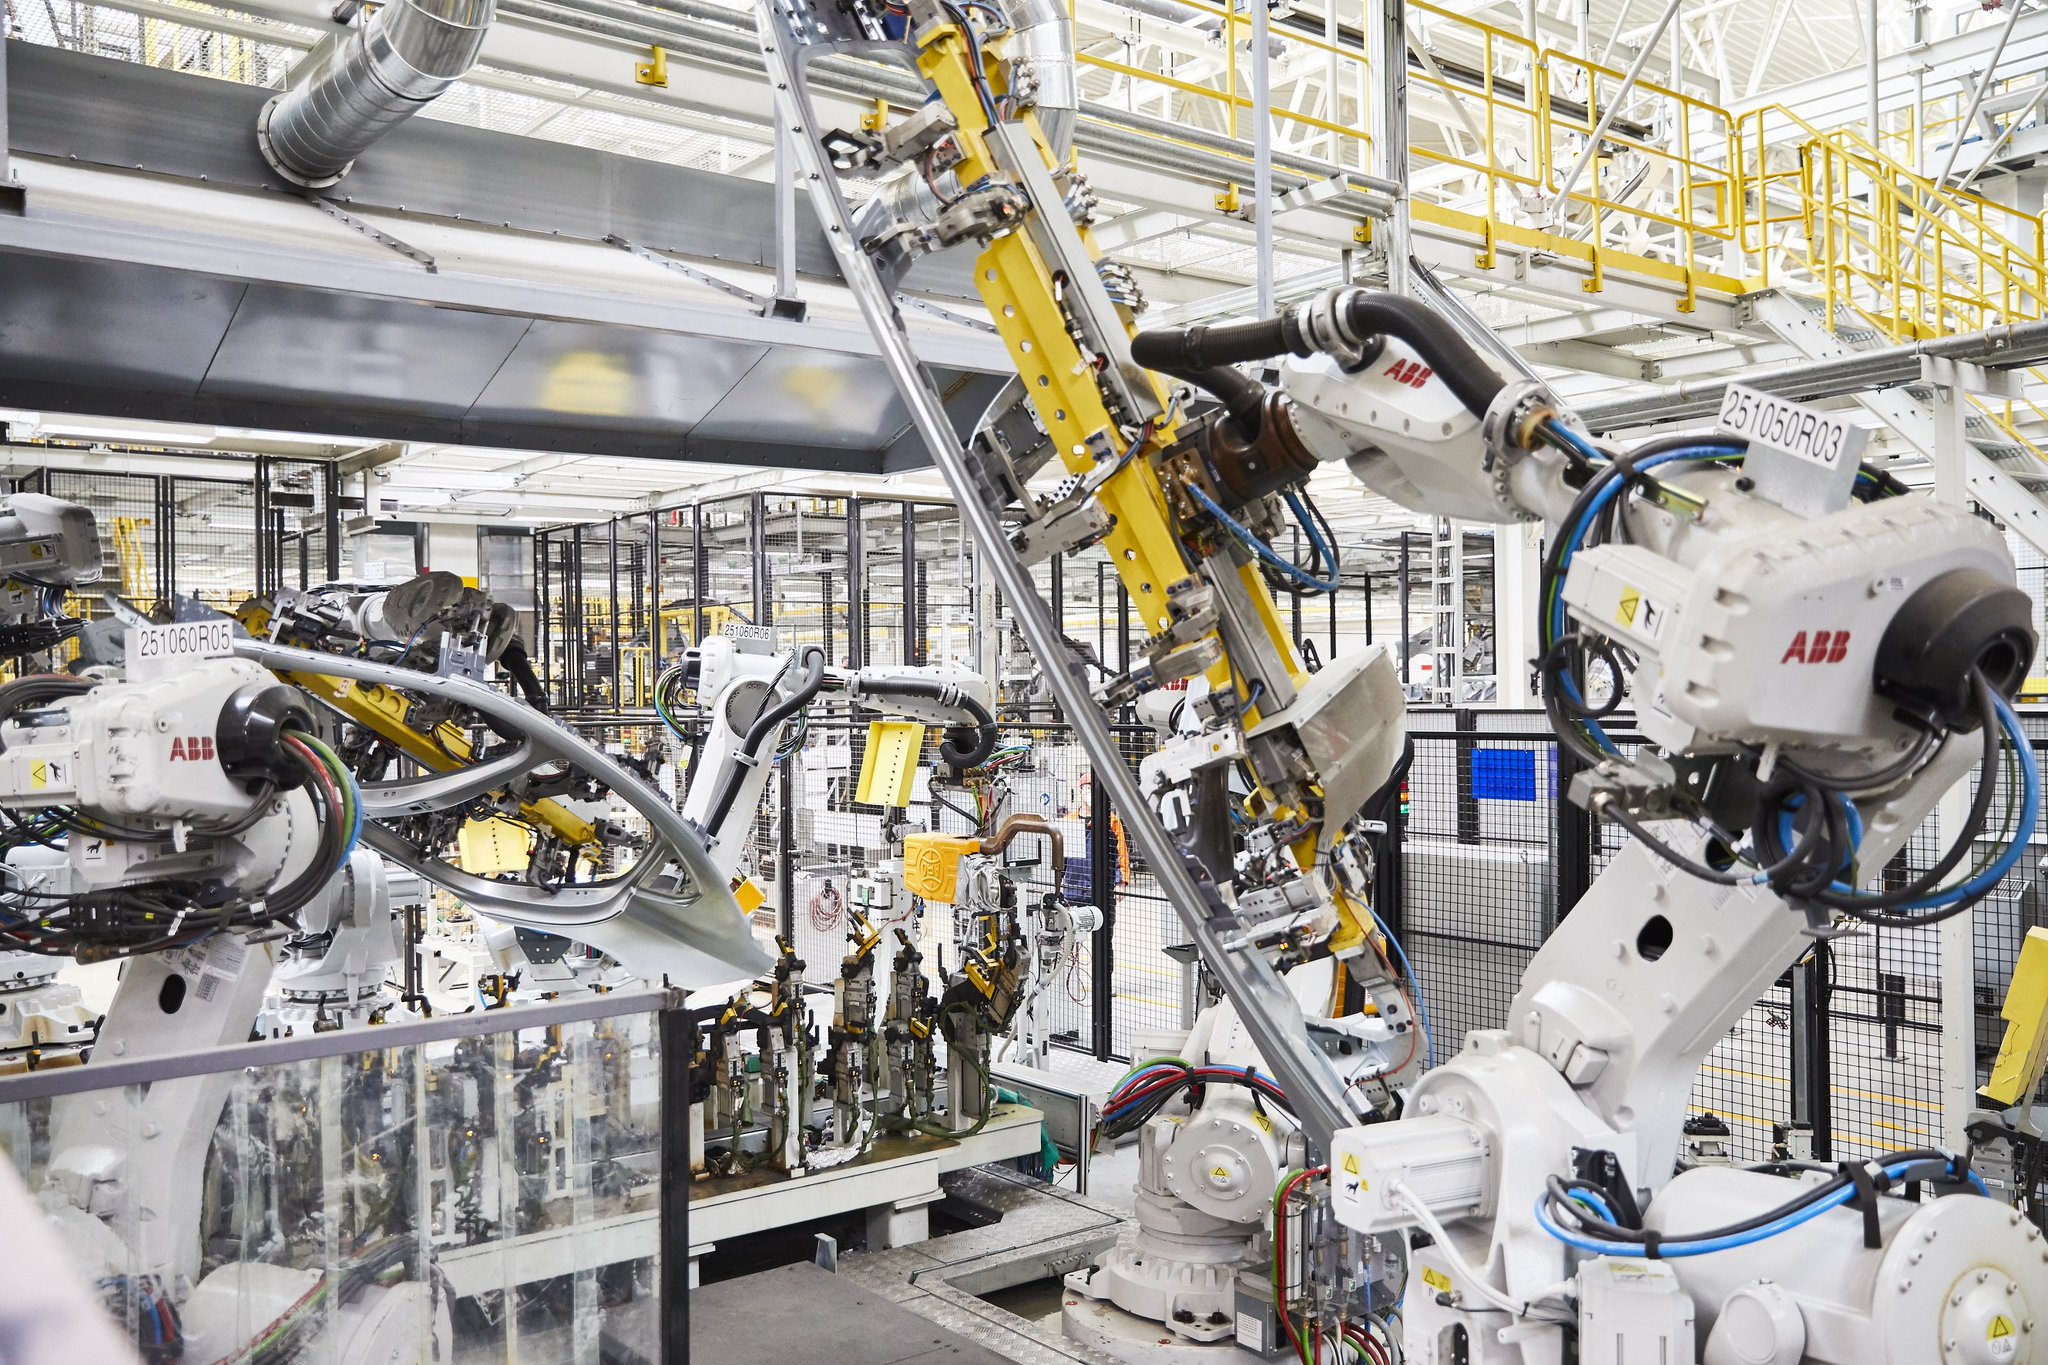 ABB Robotics Twitter: "DYK: The IRB 6700 #robot has the highest performance in the 150-300 kg class. The entire #robot structure has been strengthened with higher rigidity for increased accuracy, shorter